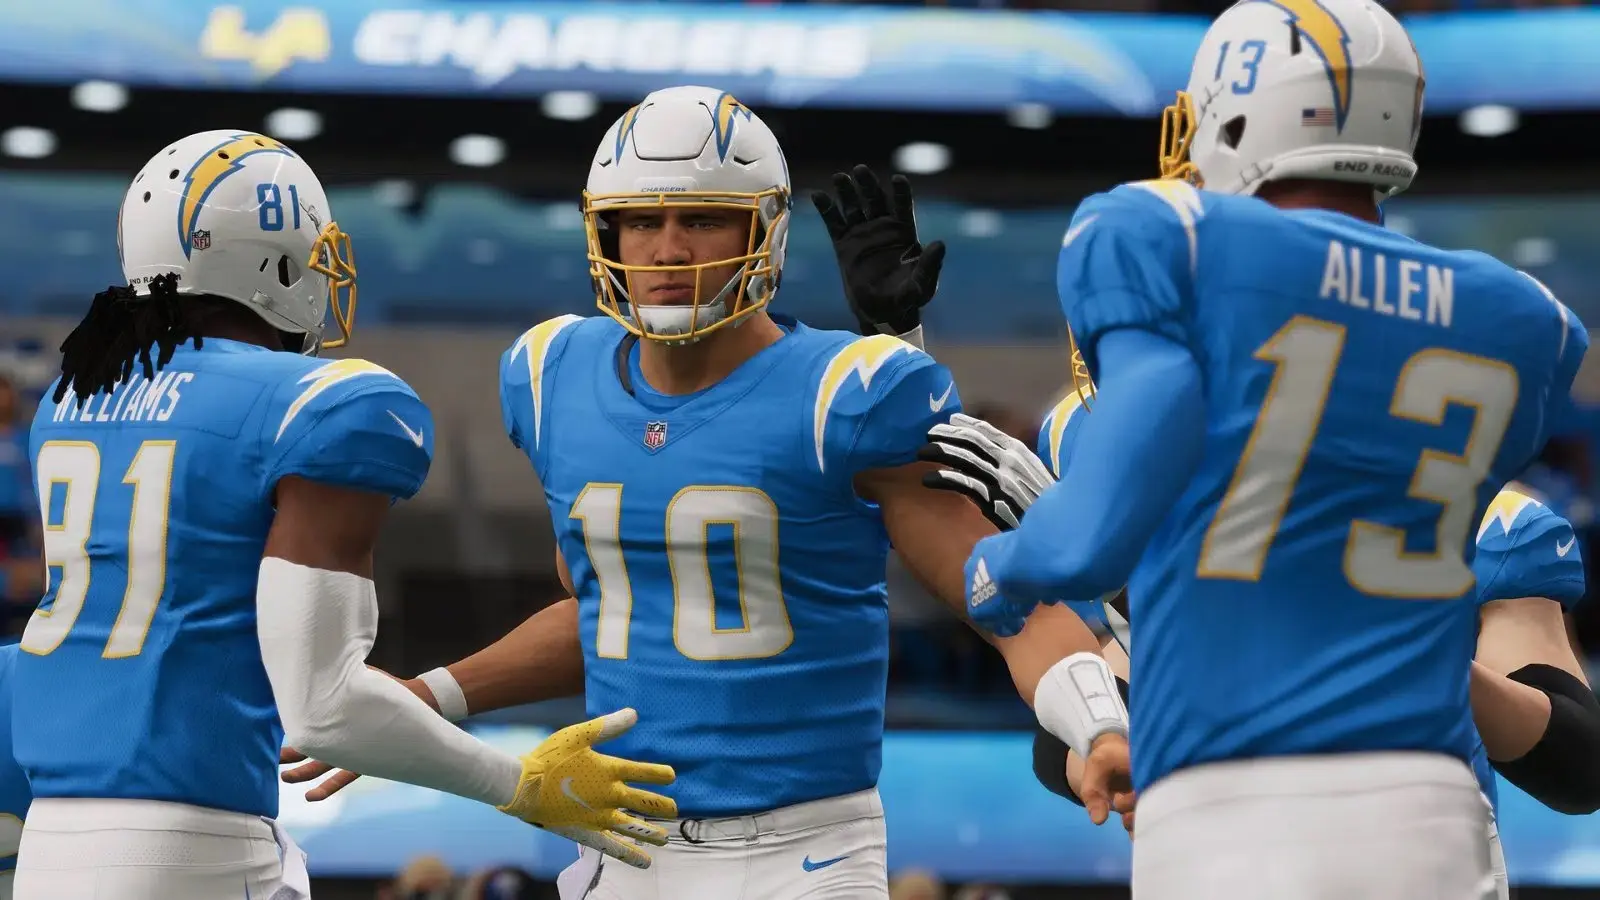 Madden NFL 23 Mobile release date, features revealed 